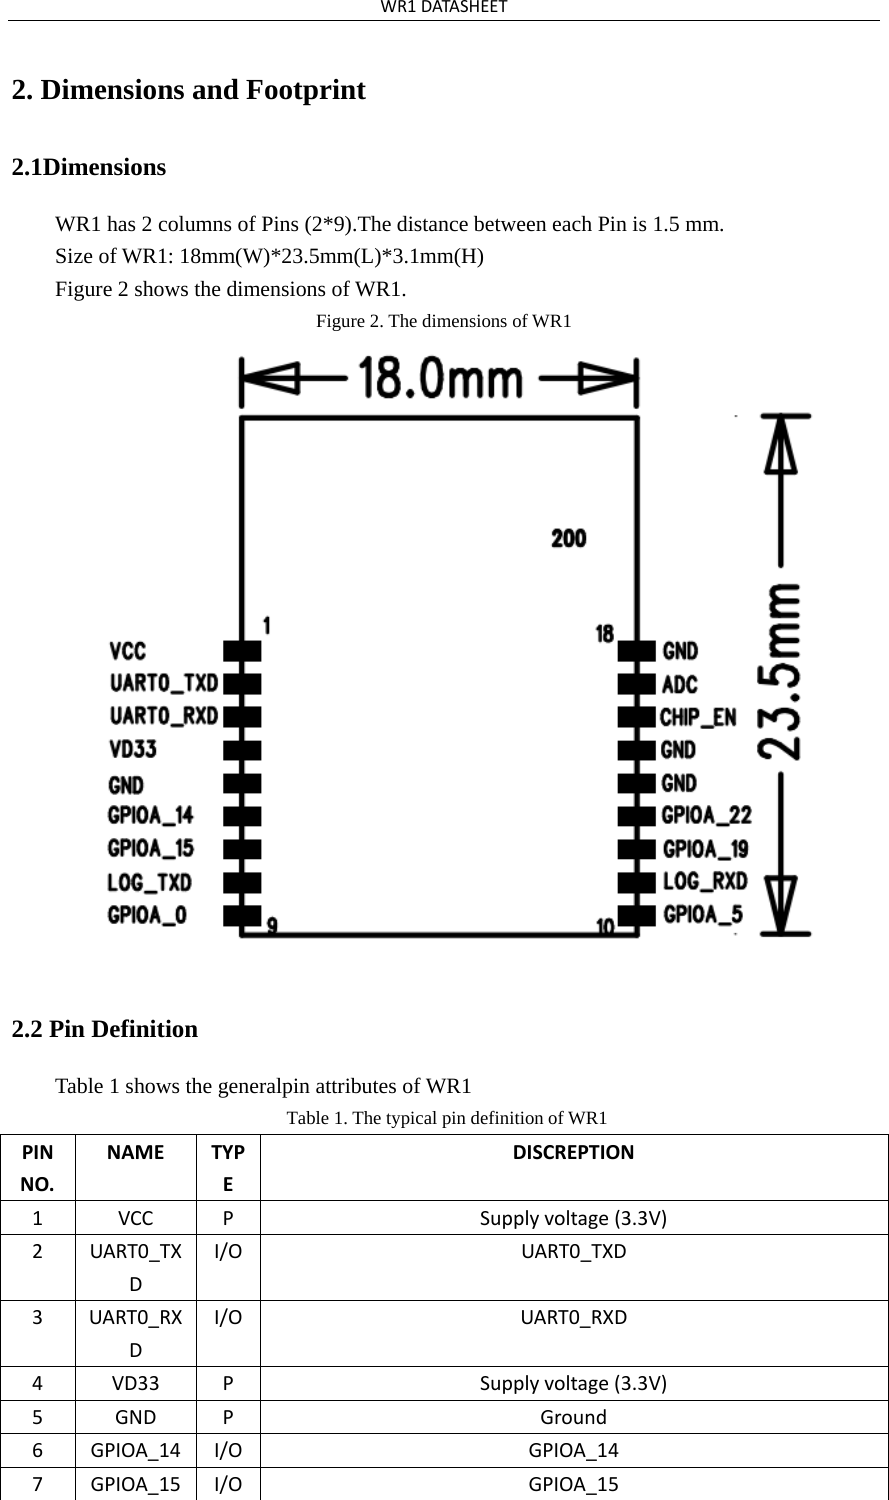 WR1DATASHEET2. Dimensions and Footprint2.1Dimensions WR1 has 2 columns of Pins (2*9).The distance between each Pin is 1.5 mm. Size of WR1: 18mm(W)*23.5mm(L)*3.1mm(H) Figure 2 shows the dimensions of WR1. Figure 2. The dimensions of WR1 2.2 Pin Definition Table 1 shows the generalpin attributes of WR1 Table 1. The typical pin definition of WR1 PINNO.NAMETYPEDISCREPTION1VCCPSupplyvoltage(3.3V)2UART0_TXDI/OUART0_TXD3UART0_RXDI/OUART0_RXD4VD33PSupplyvoltage(3.3V)5GNDPGround6GPIOA_14I/OGPIOA_147GPIOA_15I/OGPIOA_15